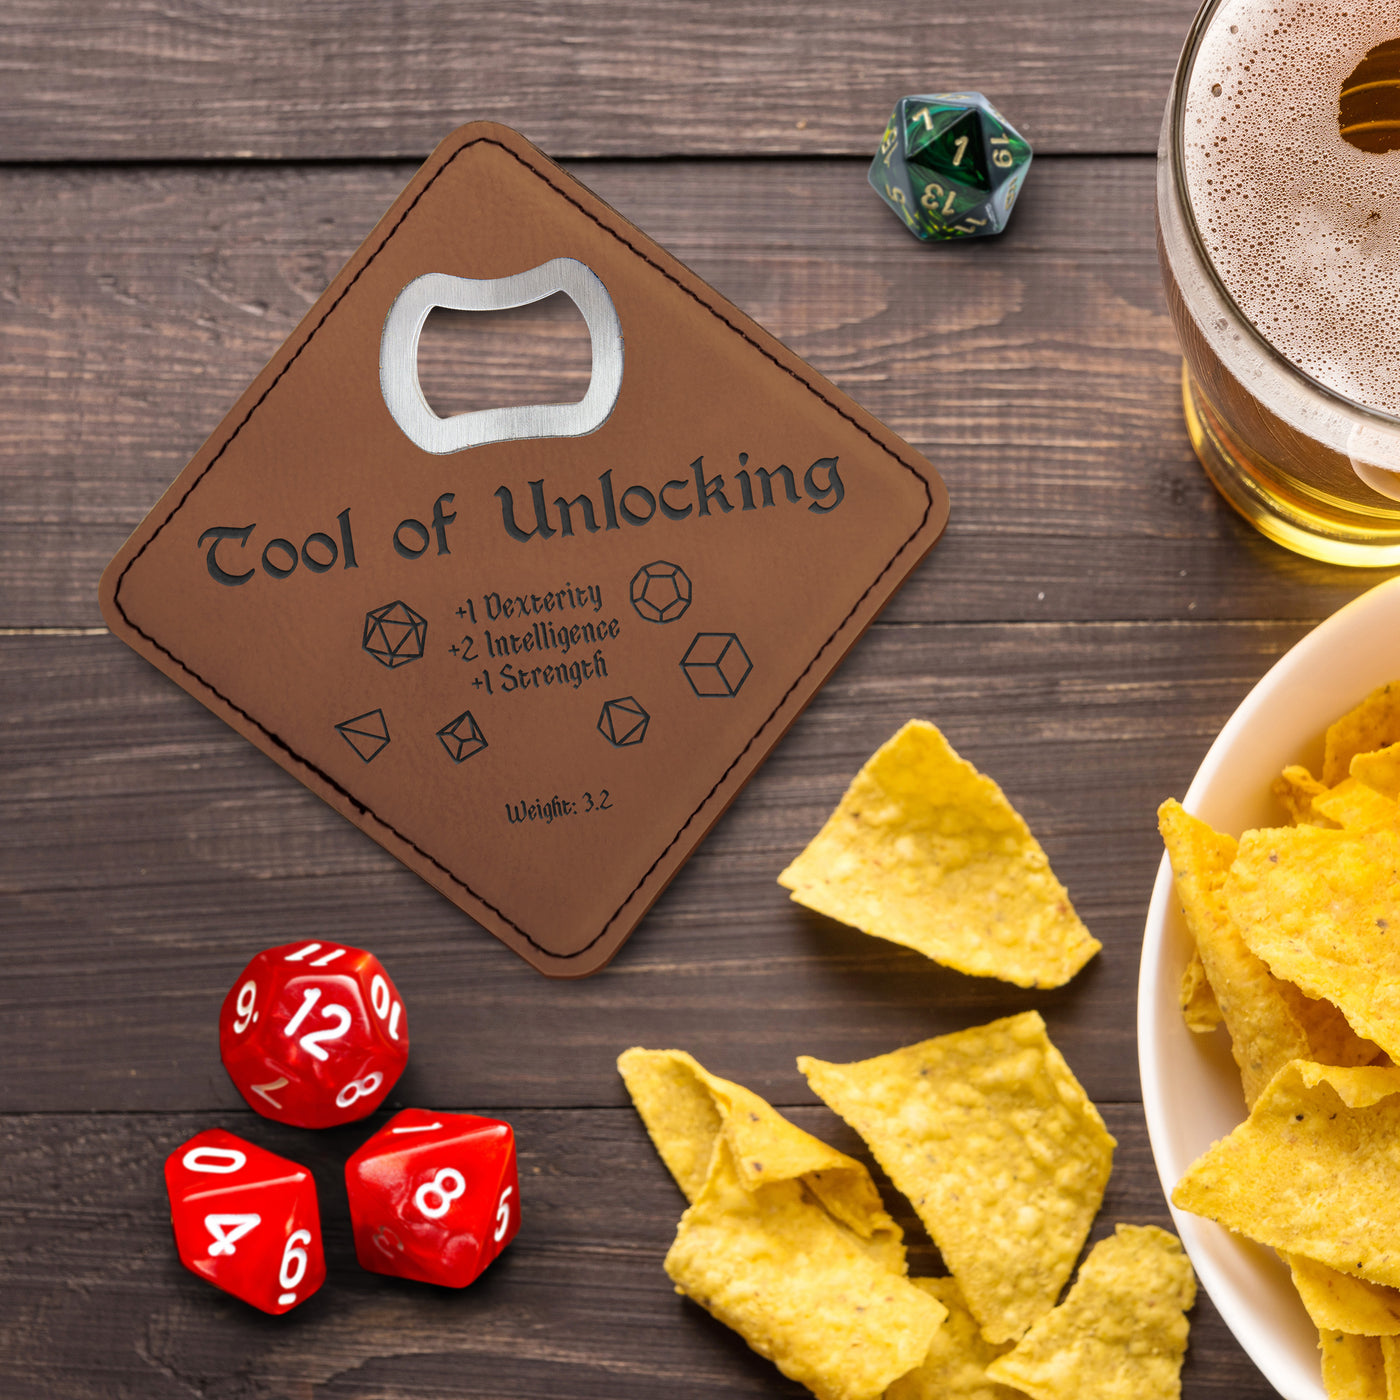 Dungeons and Dragons Tool of Unlocking DnD Coaster Bottle Opener | DnD Gift for Men | Dungeon Master Gift | DnD Stuff | D&D Gifts